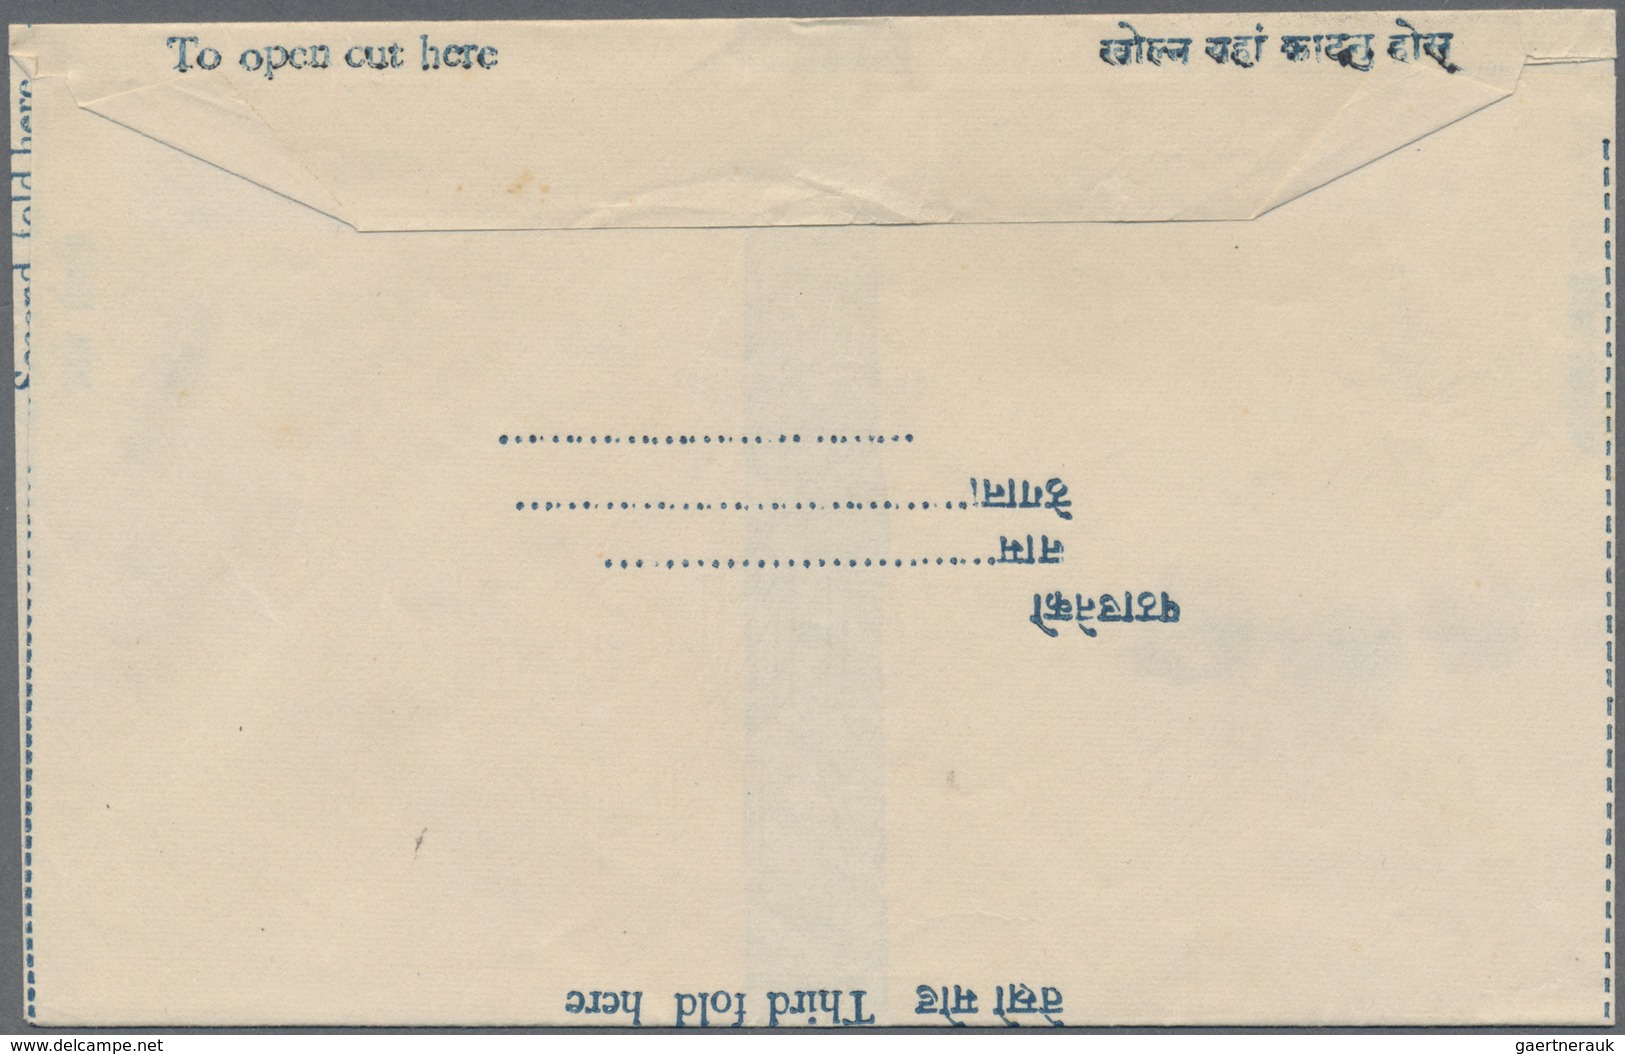 GA Nepal: 1959 Five Aerogrammes 8p. blue, Type 1 (without corner ornaments), all different in Wmk, one